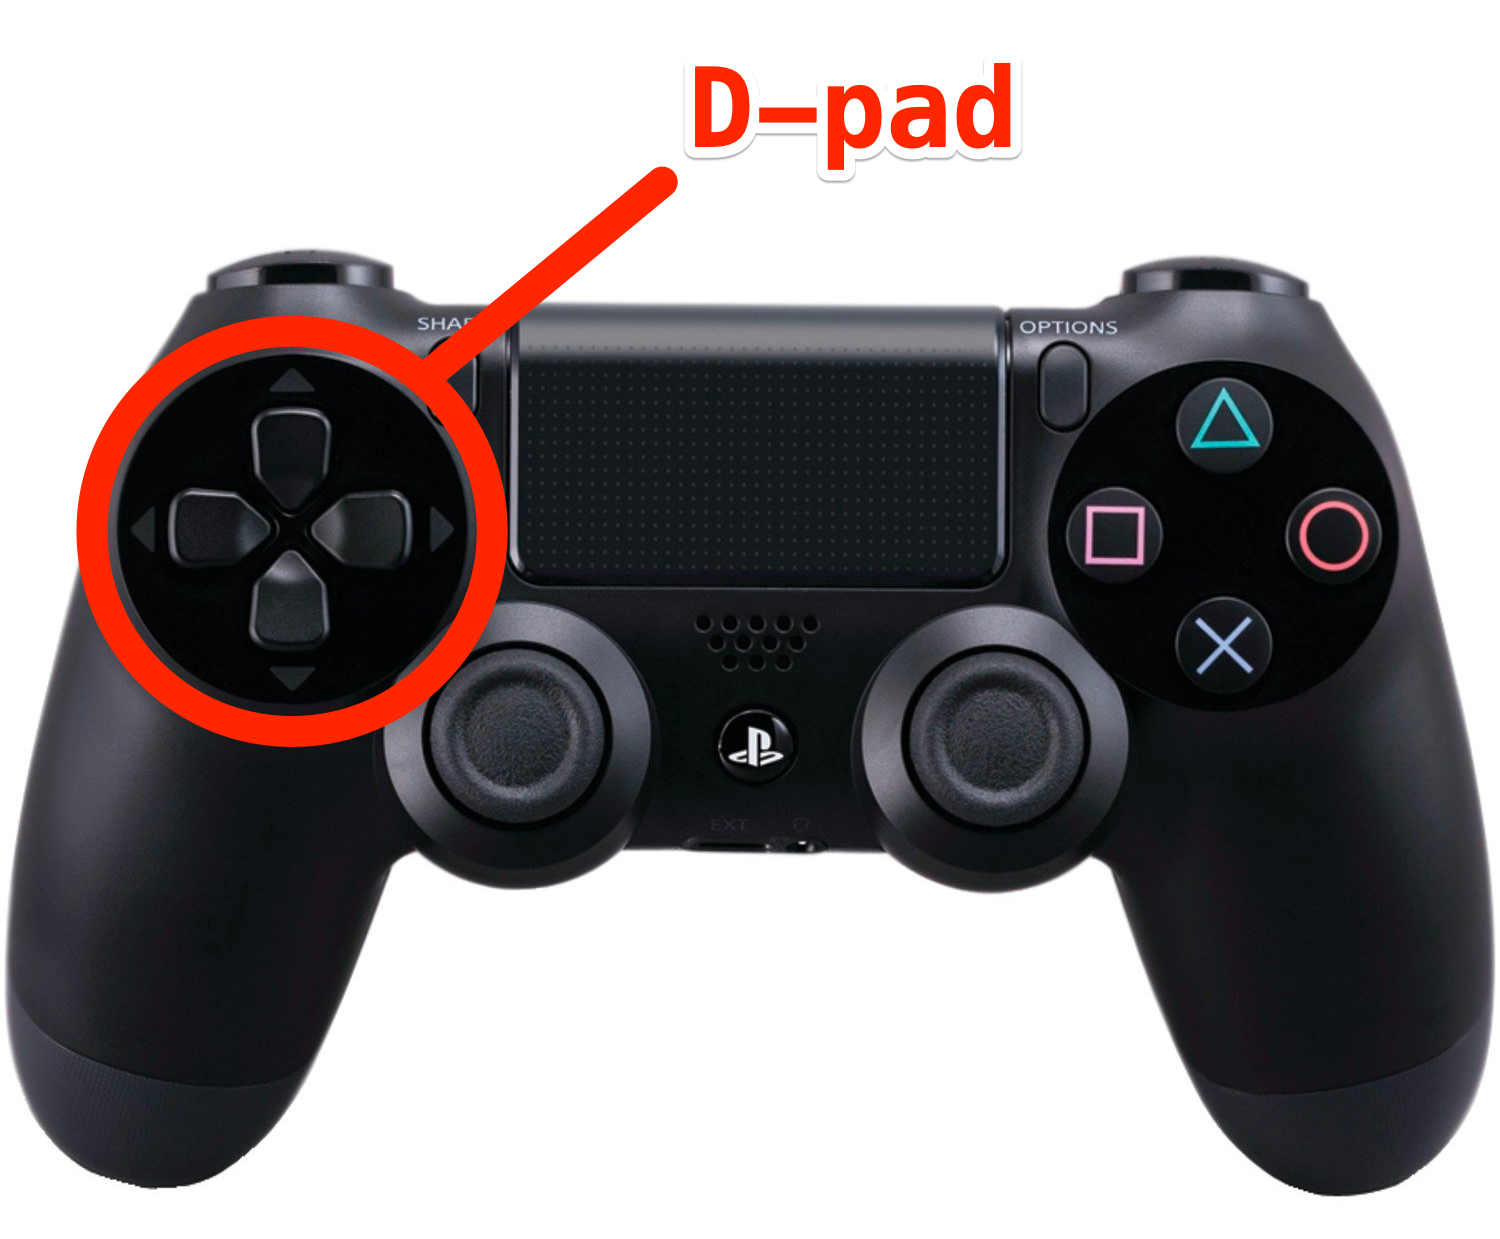 A PlayStation DualShock 4 controller, with the D-pad highlighted.